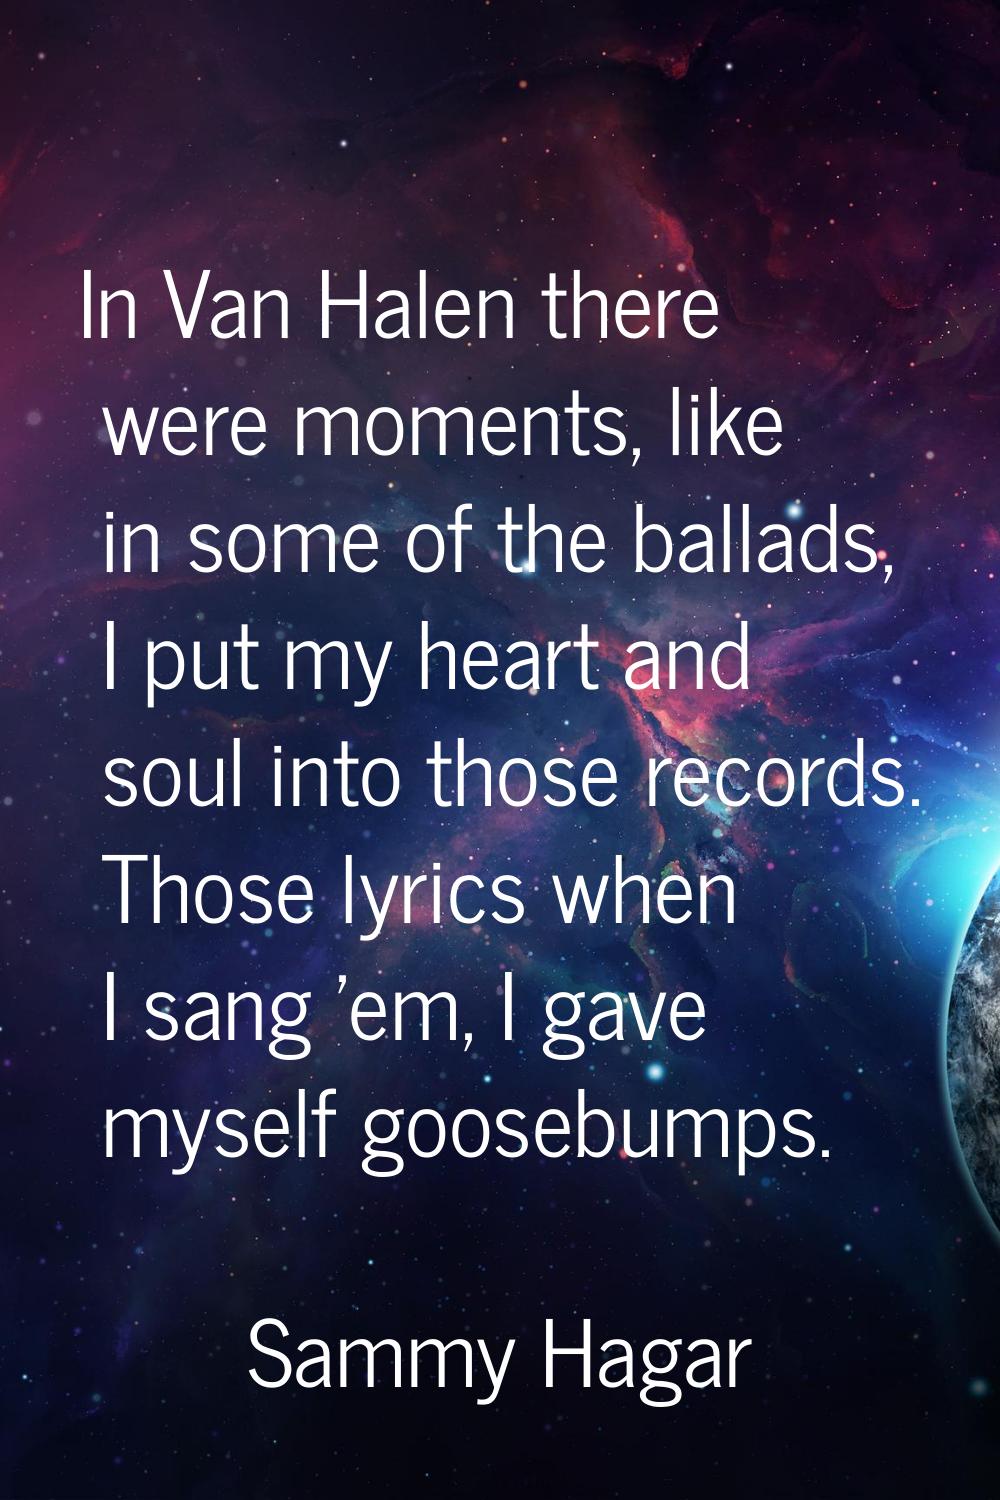 In Van Halen there were moments, like in some of the ballads, I put my heart and soul into those re